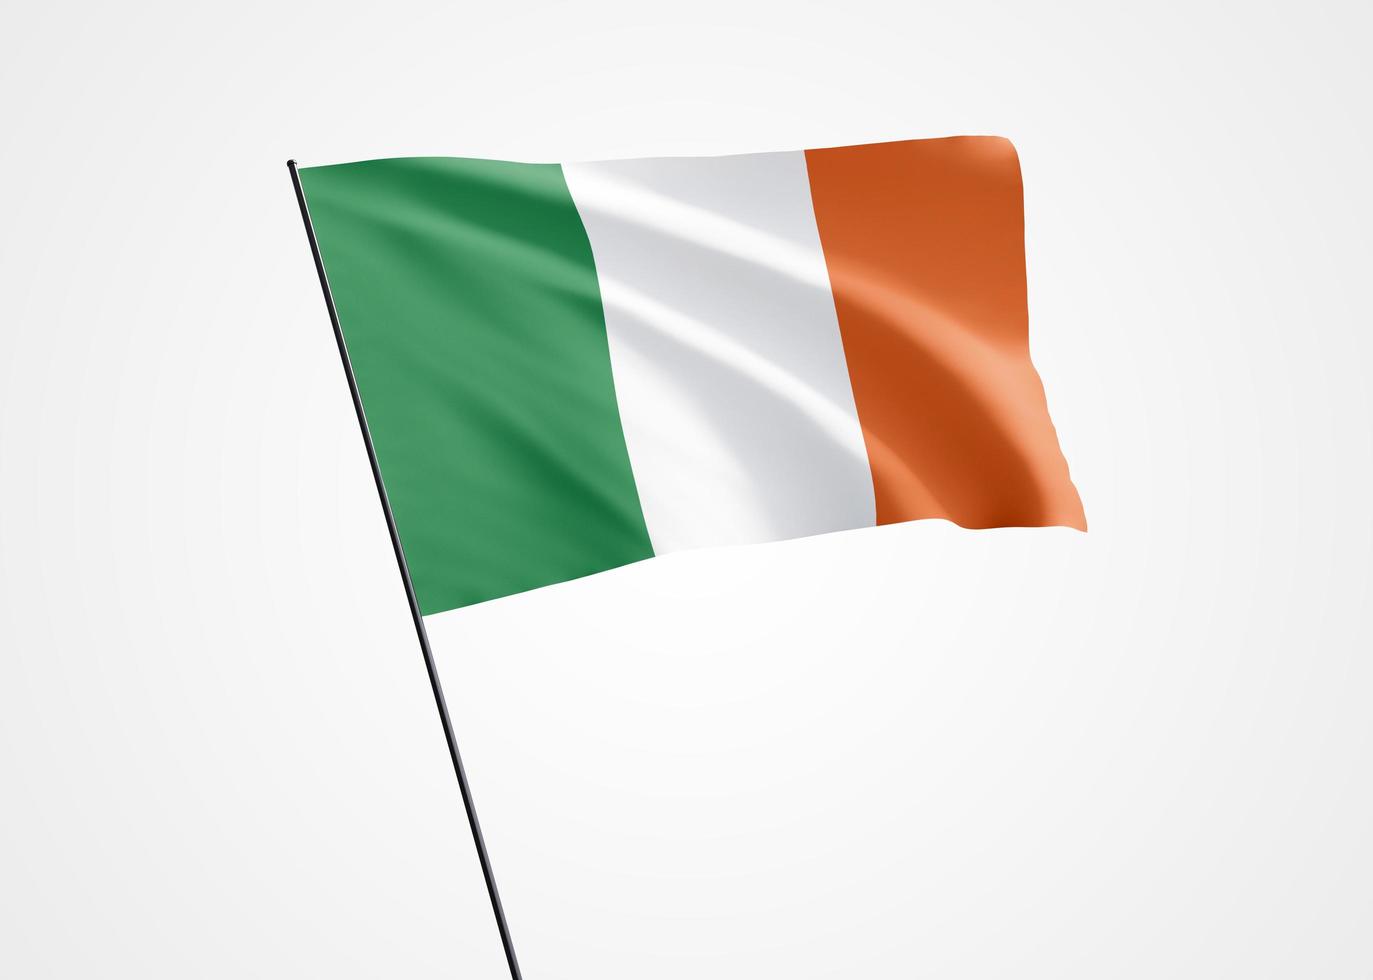 Ireland flag flying high in the white isolated background. April 24 Republic of Ireland independence day. World national flag collection world national flag collection photo